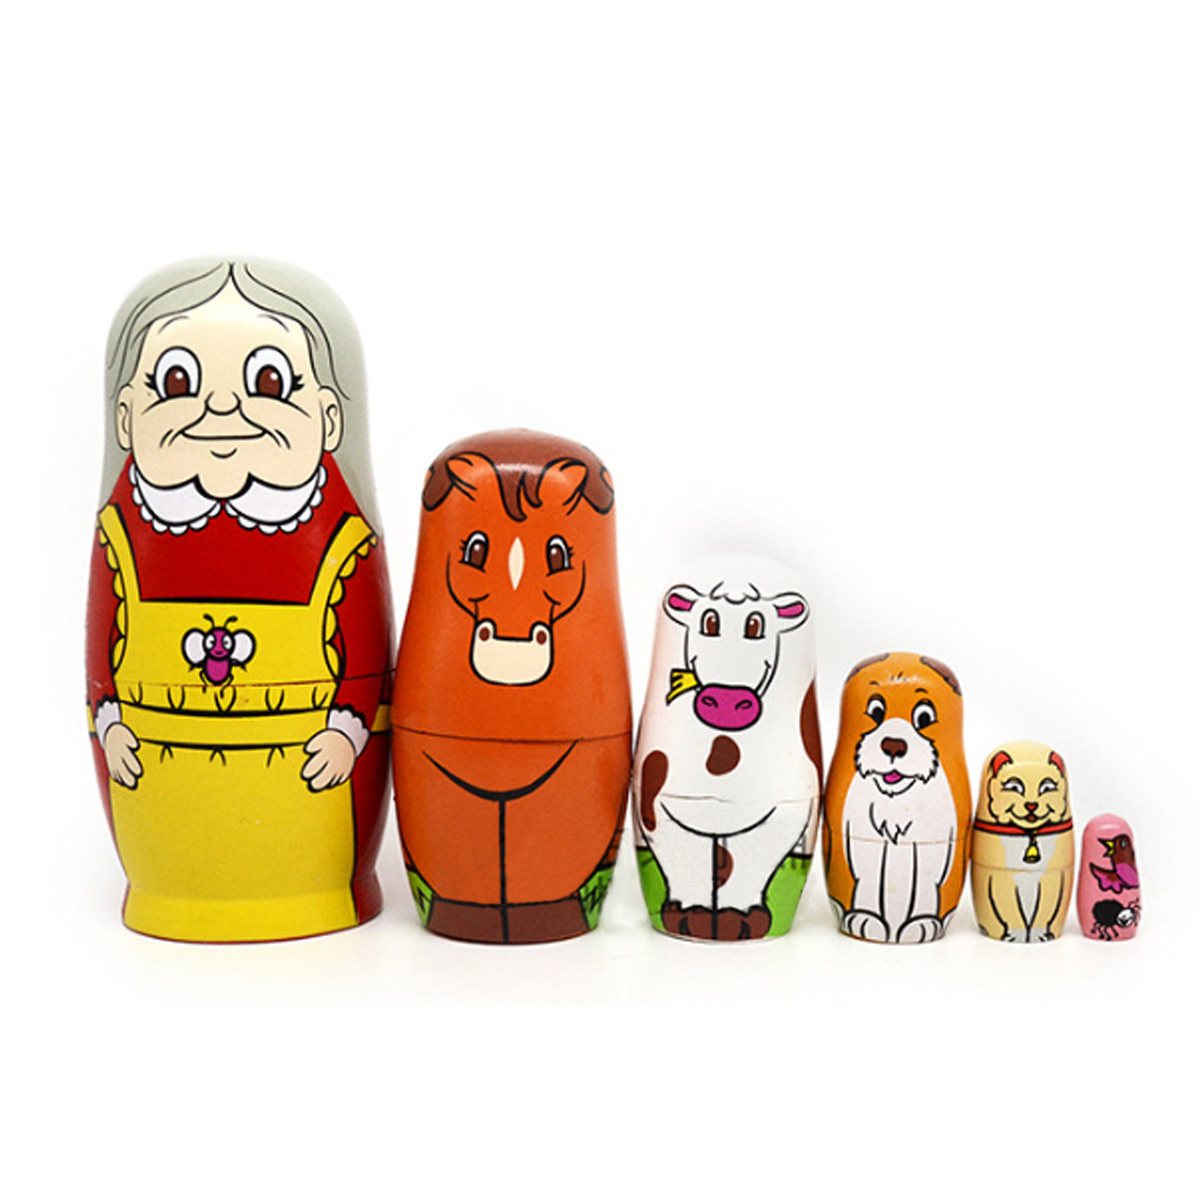 

6Pcs/Set Nesting Dolls Baby Toy Gift Wooden Matryoshka Russian Dolls Hand Painted Home Decorations